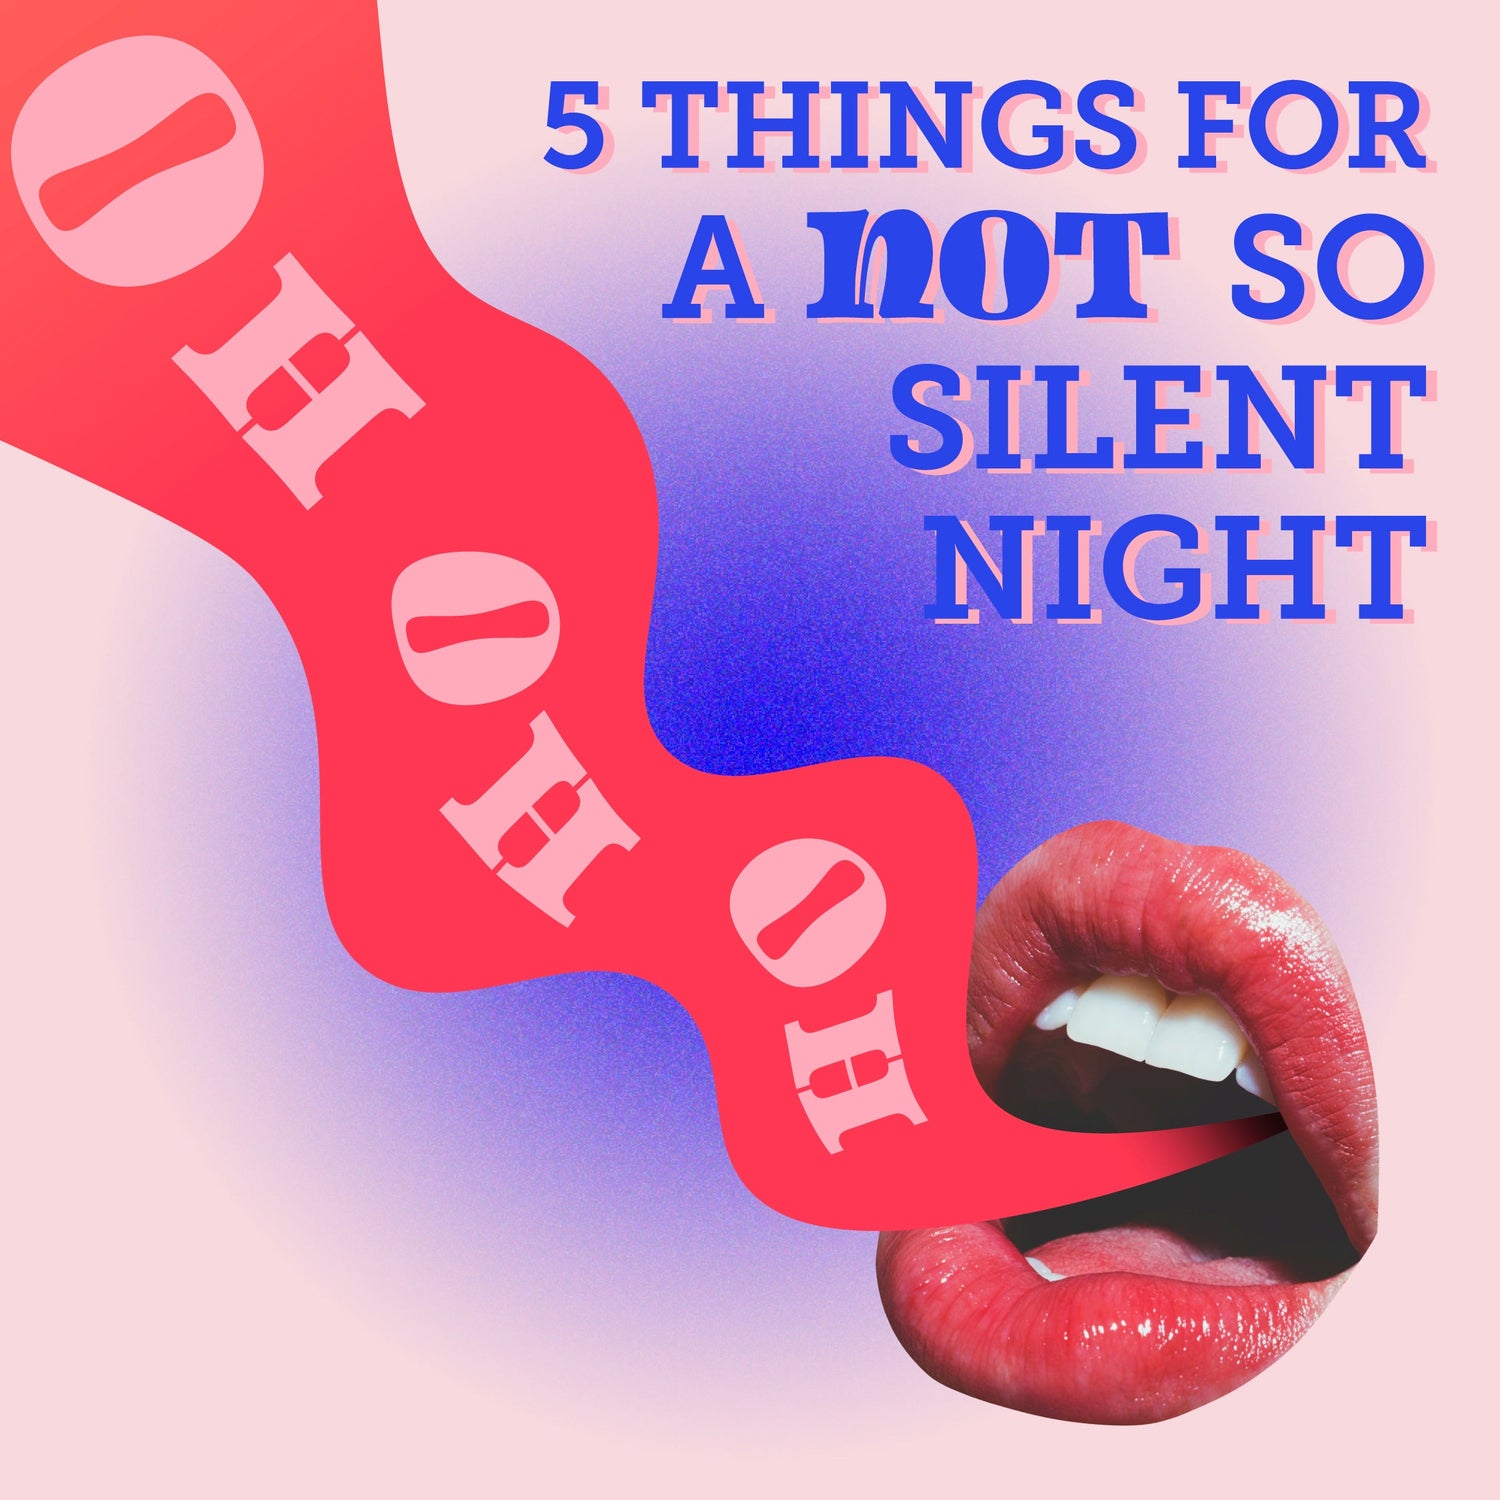 5 essentials for a NOT so silent night...